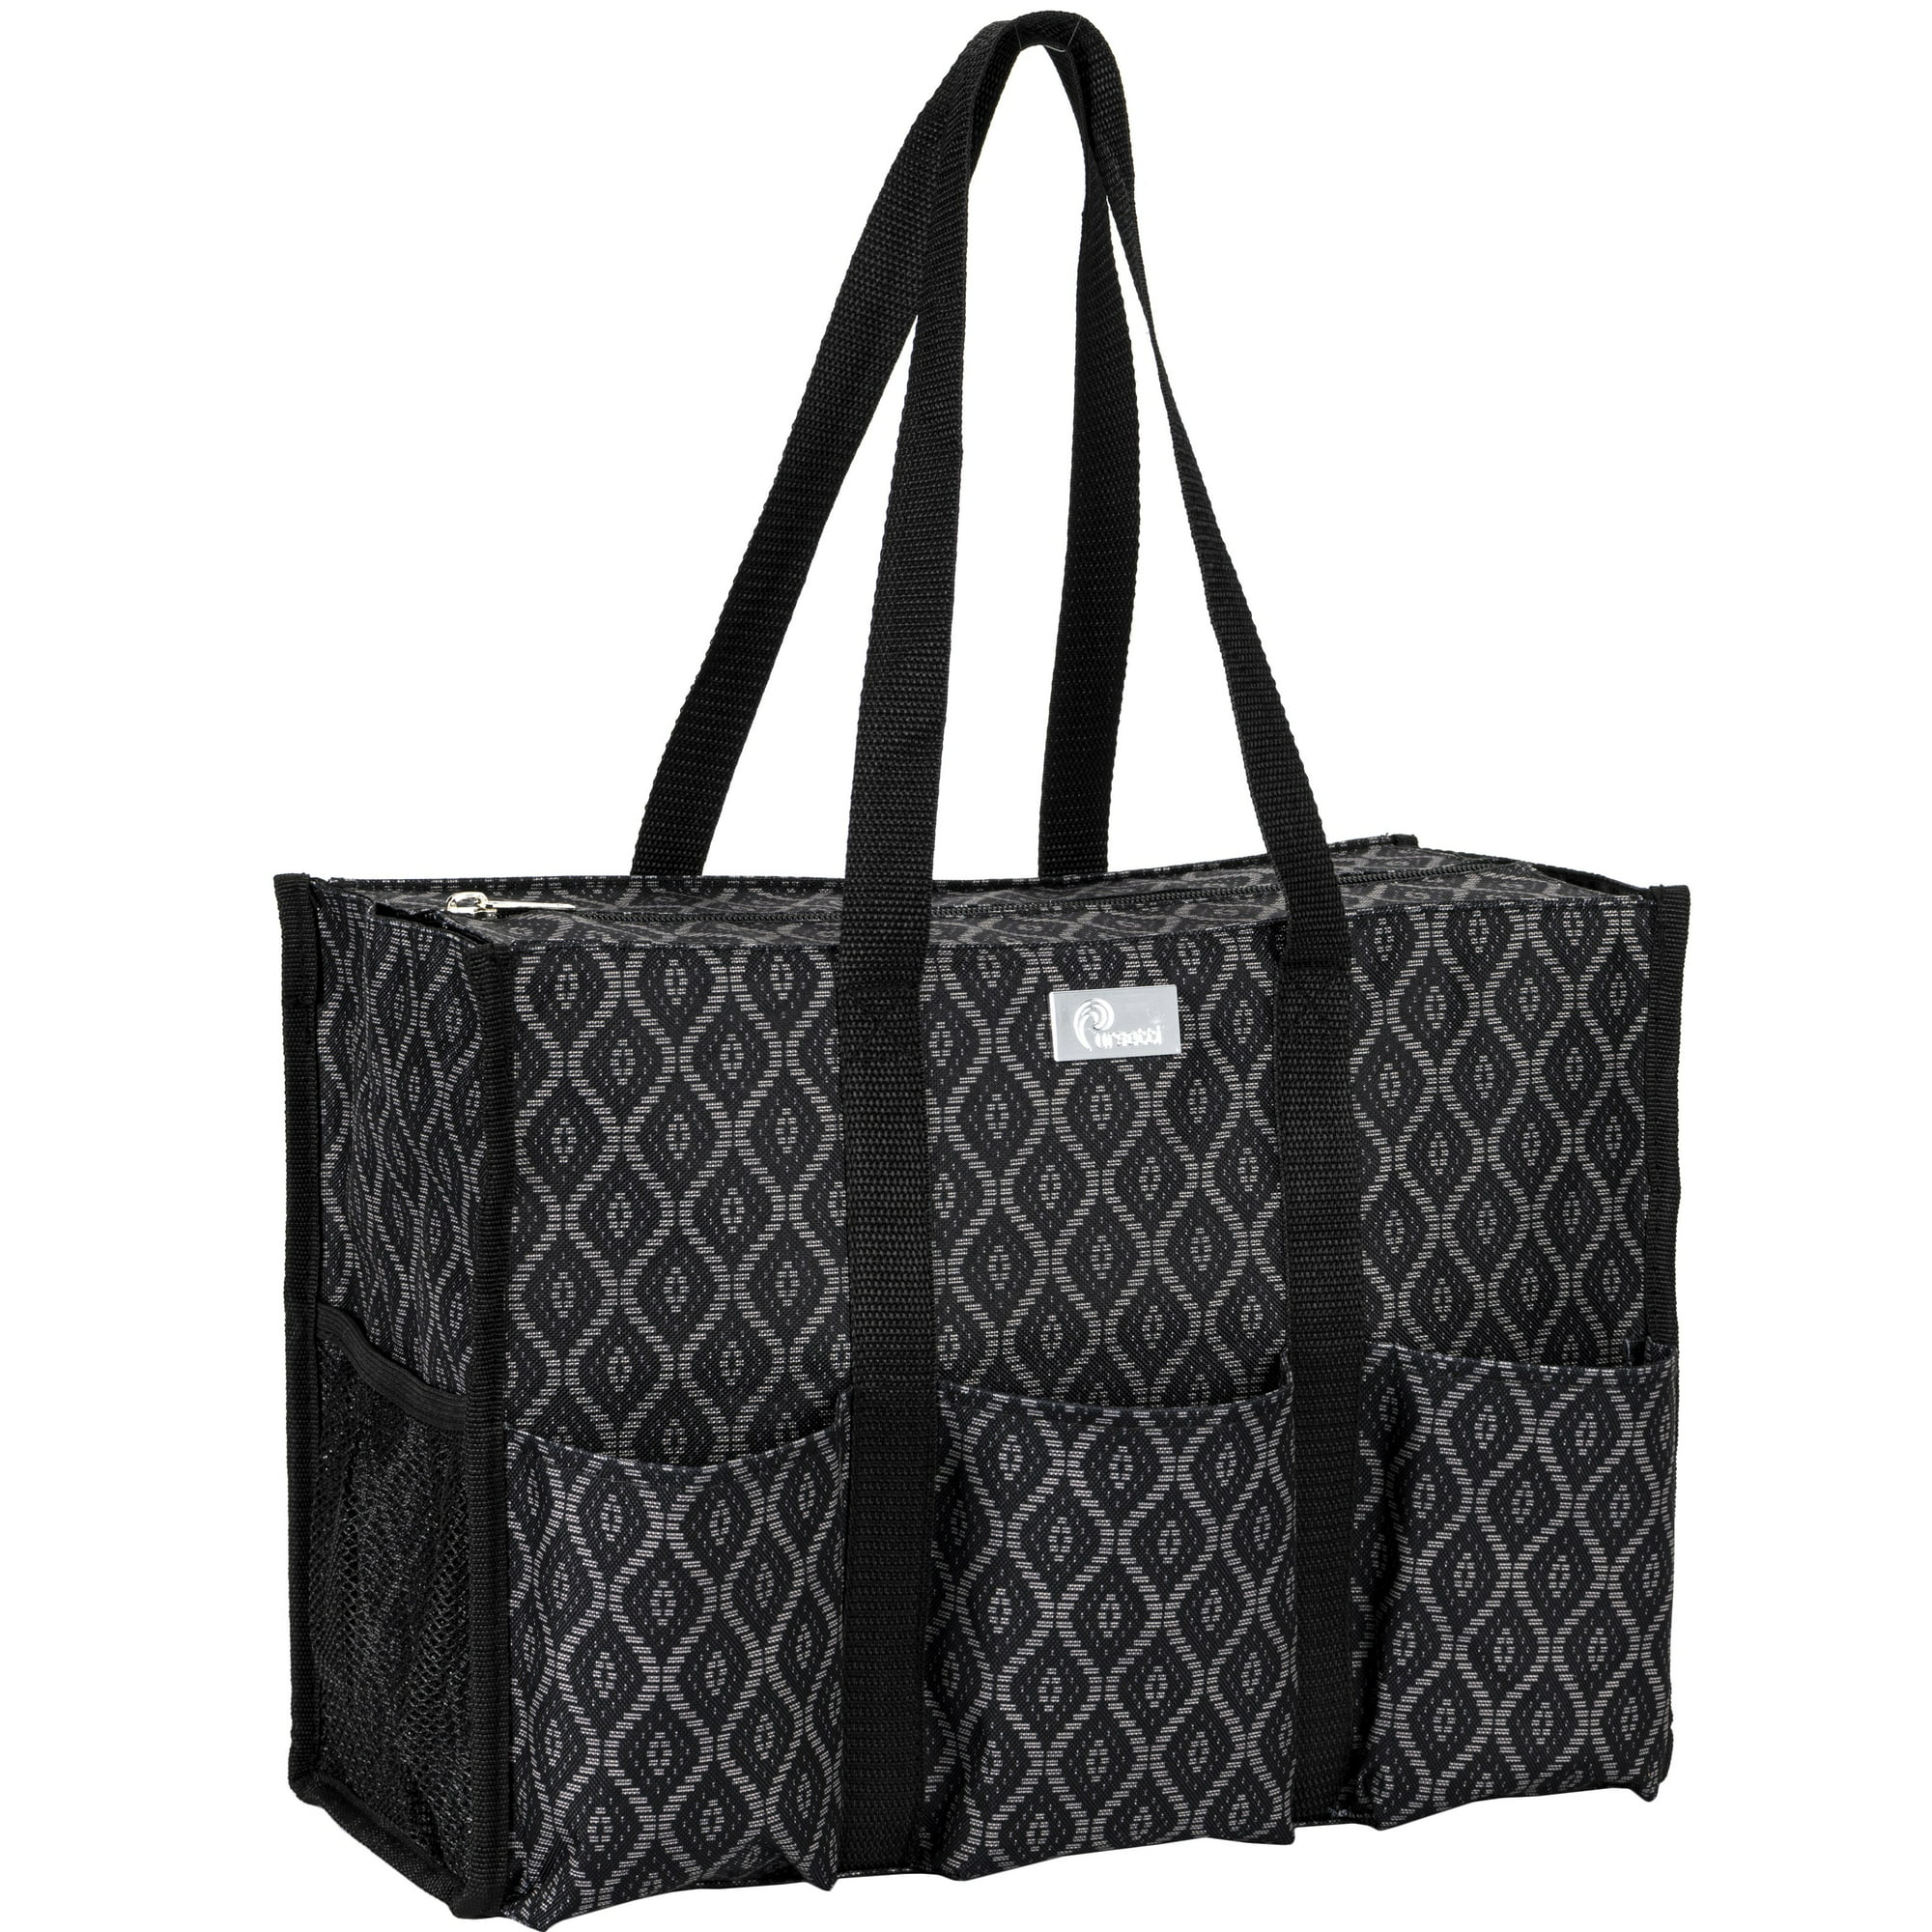 Pursetti Zip-Top Organizing Utility Tote Bag with Multiple Exterior &  Interior Pockets for Working Women, Nurses, Teachers and Soccer Moms (Black  Daisy) 